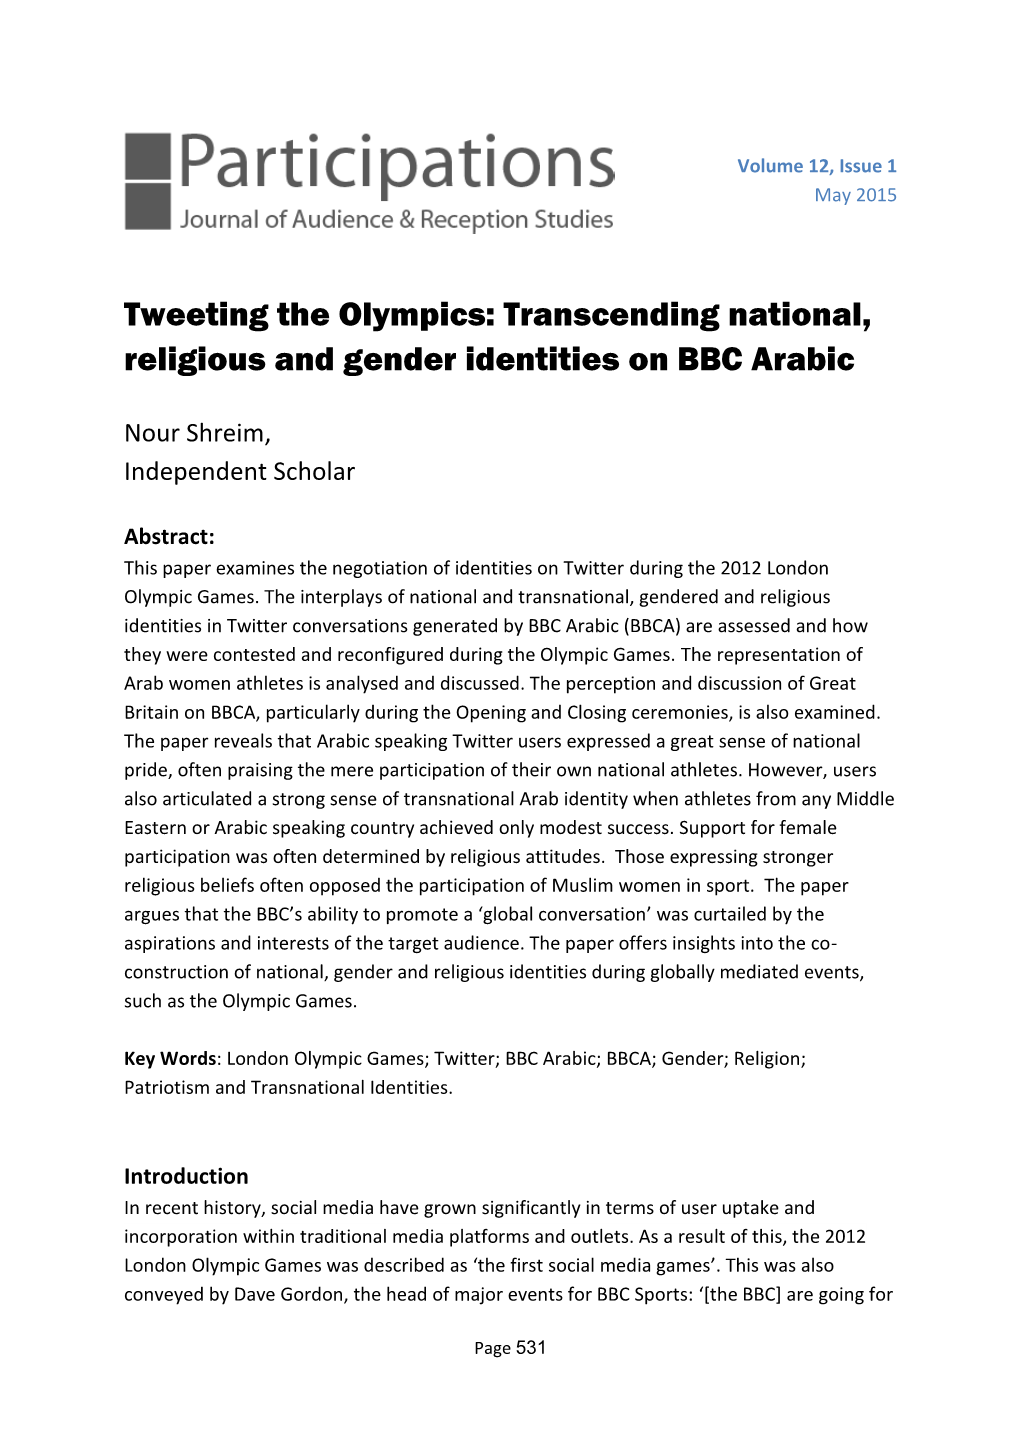 Transcending National, Religious and Gender Identities on BBC Arabic